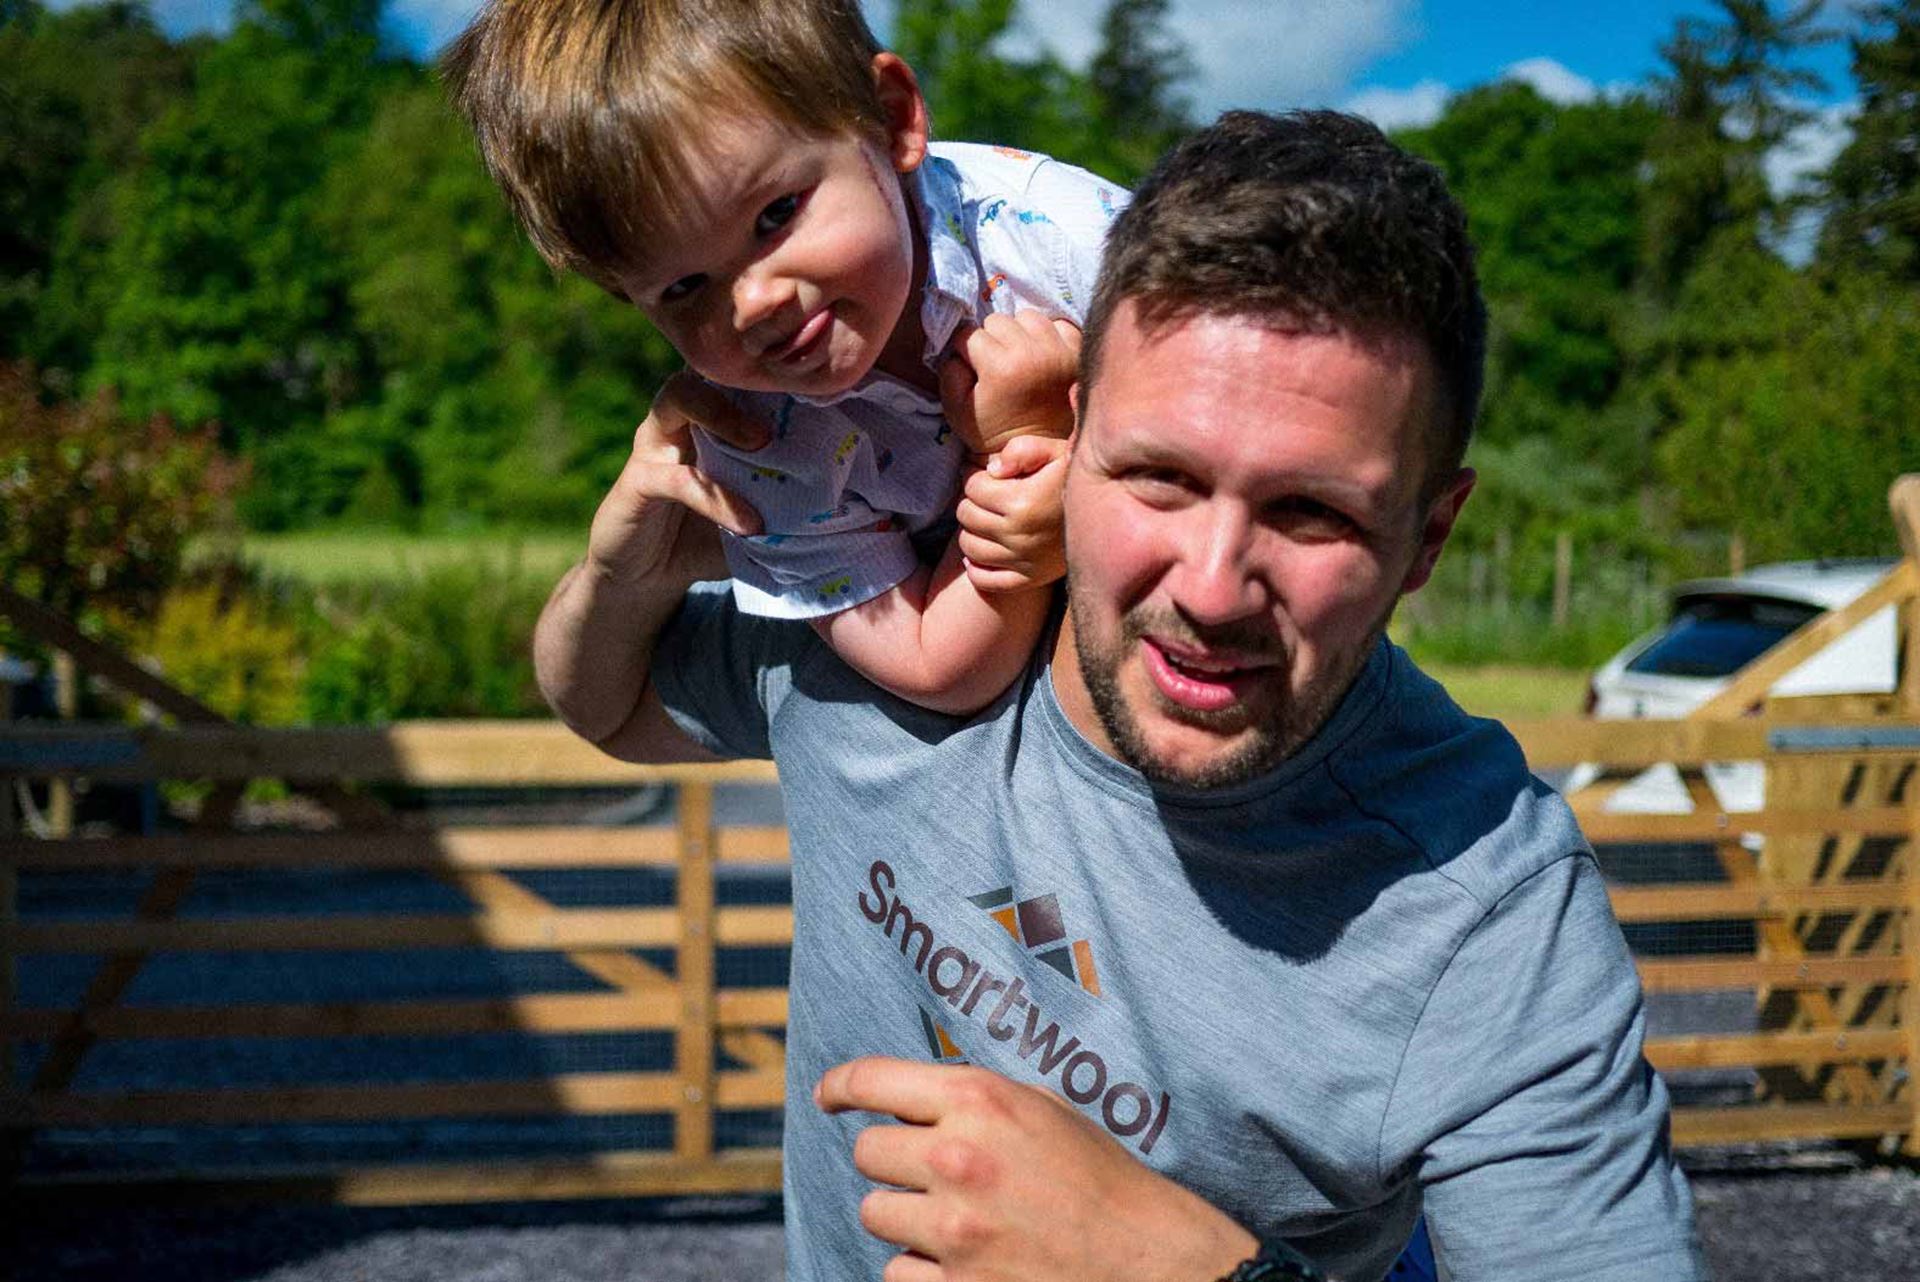 Worldwide Cancer Research supporter Jack outside holding his son George in the sunshine